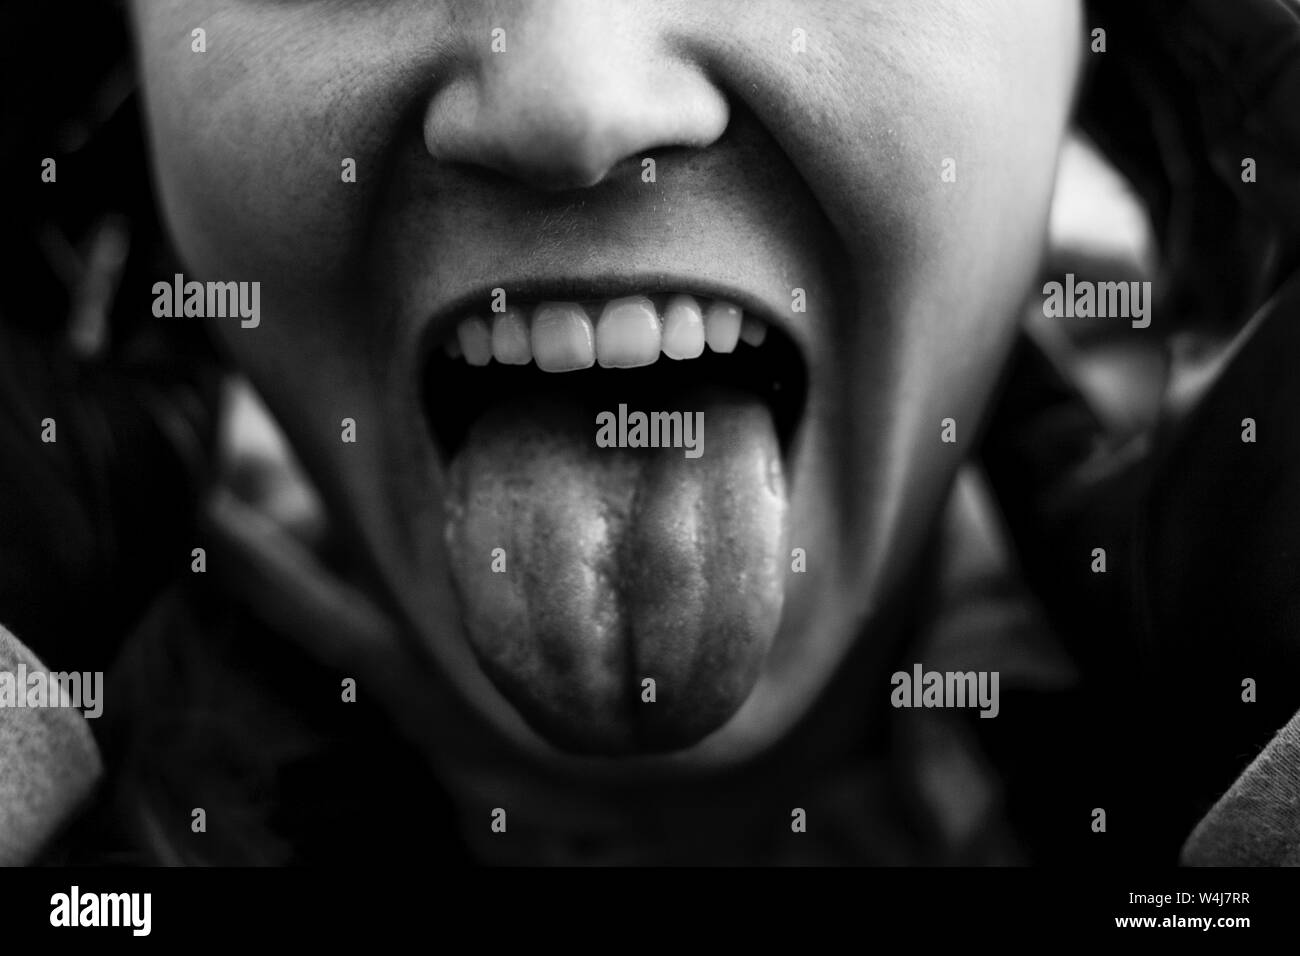 Genre black and white photo. The girl with white teeth and open mouth shows tongue. Cropped photo of a girl's face, without eyes. Stock Photo